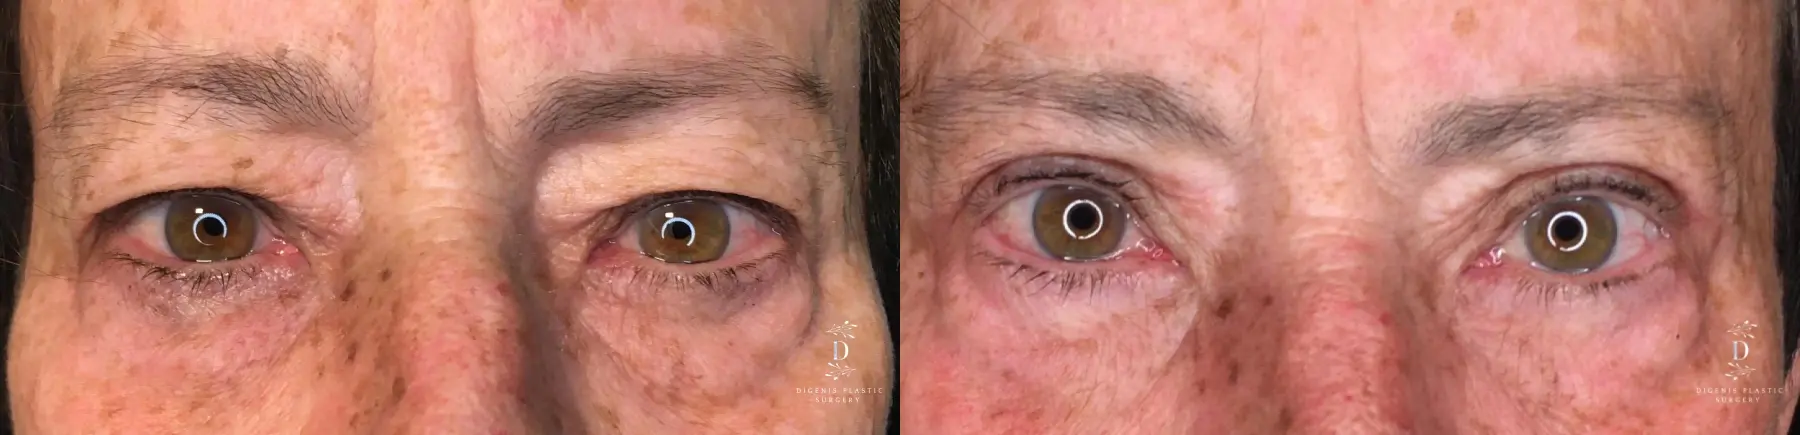 Eyelid Surgery: Patient 26 - Before and After 1